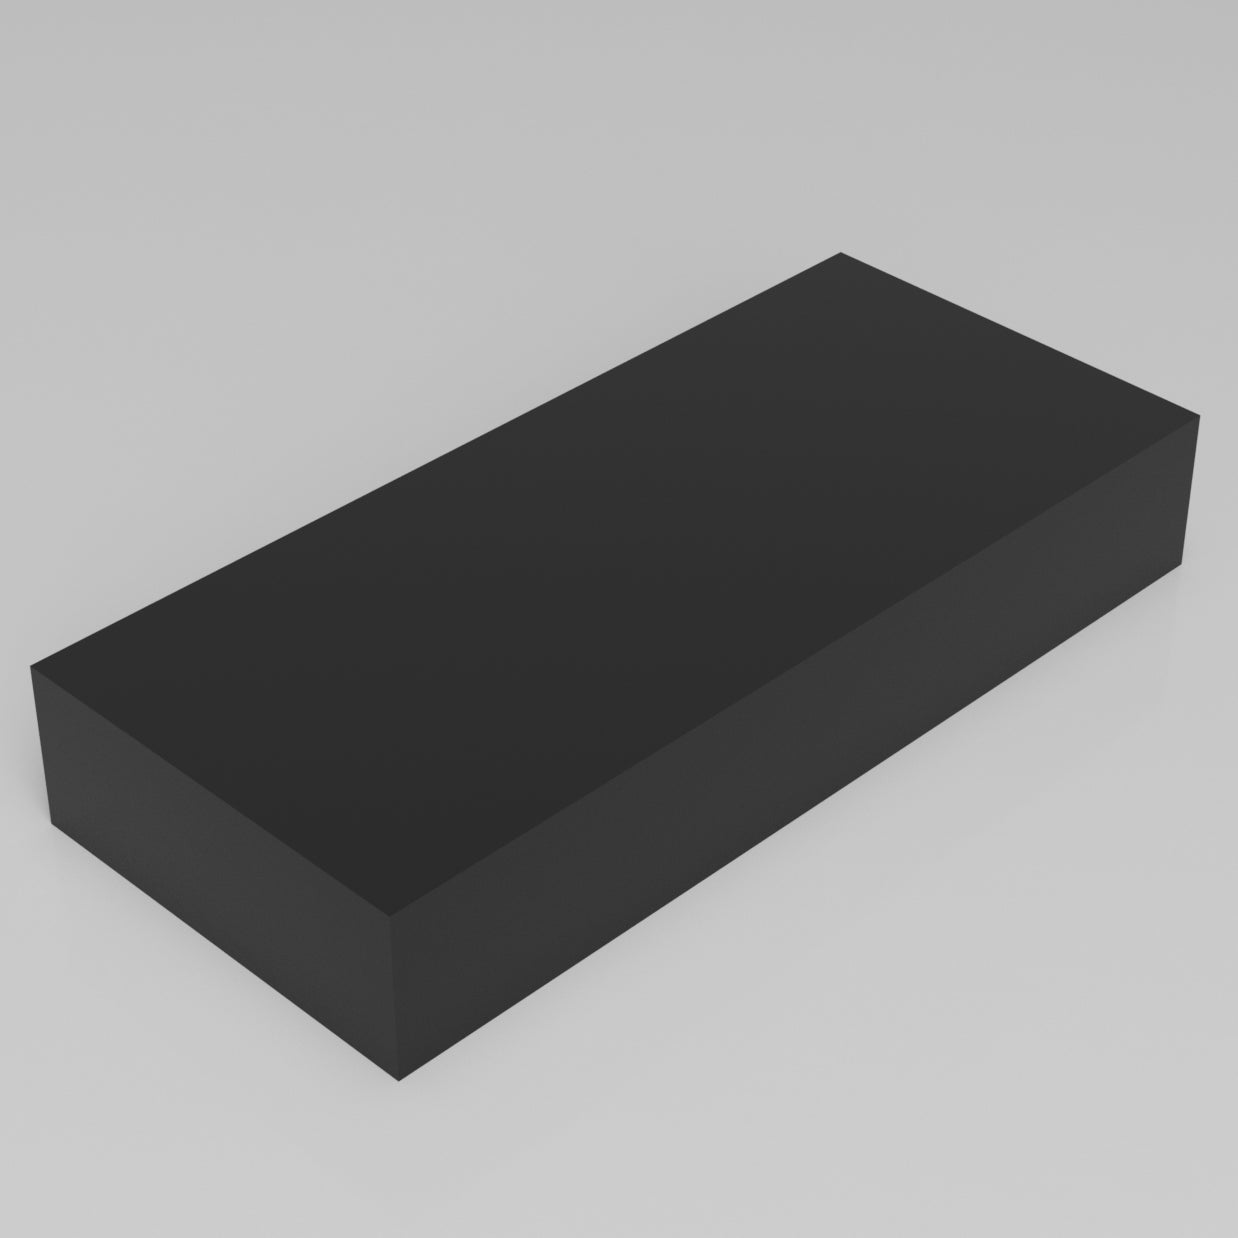 Machinable Wax Rectangular Block Front View 3 Inch by 8 Inch by 18 Inch